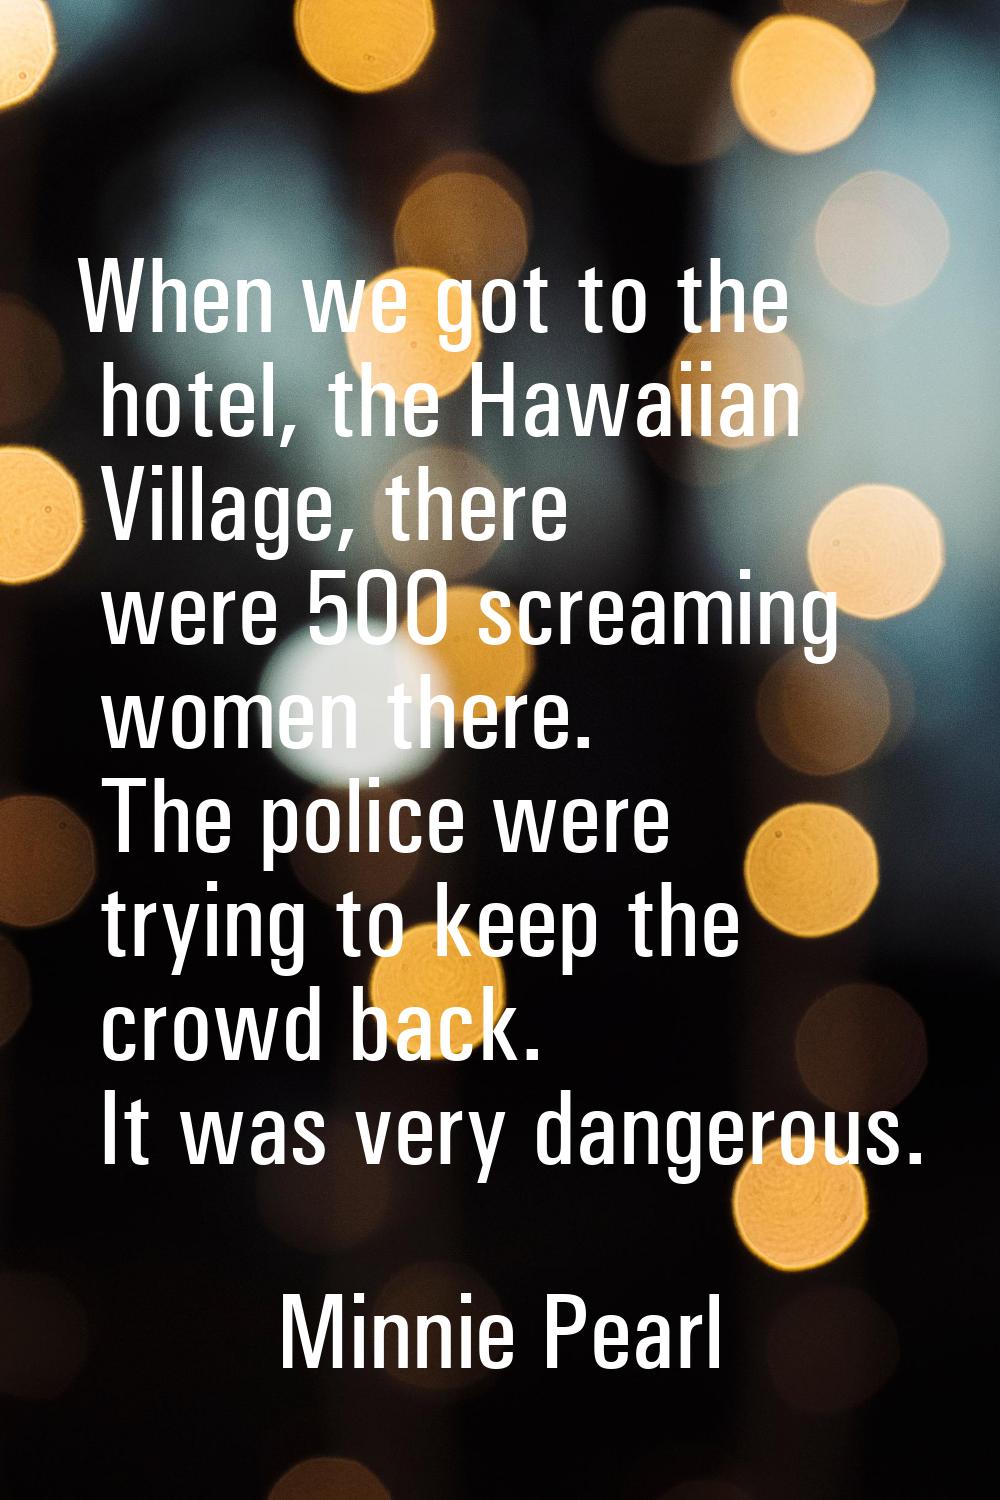 When we got to the hotel, the Hawaiian Village, there were 500 screaming women there. The police we